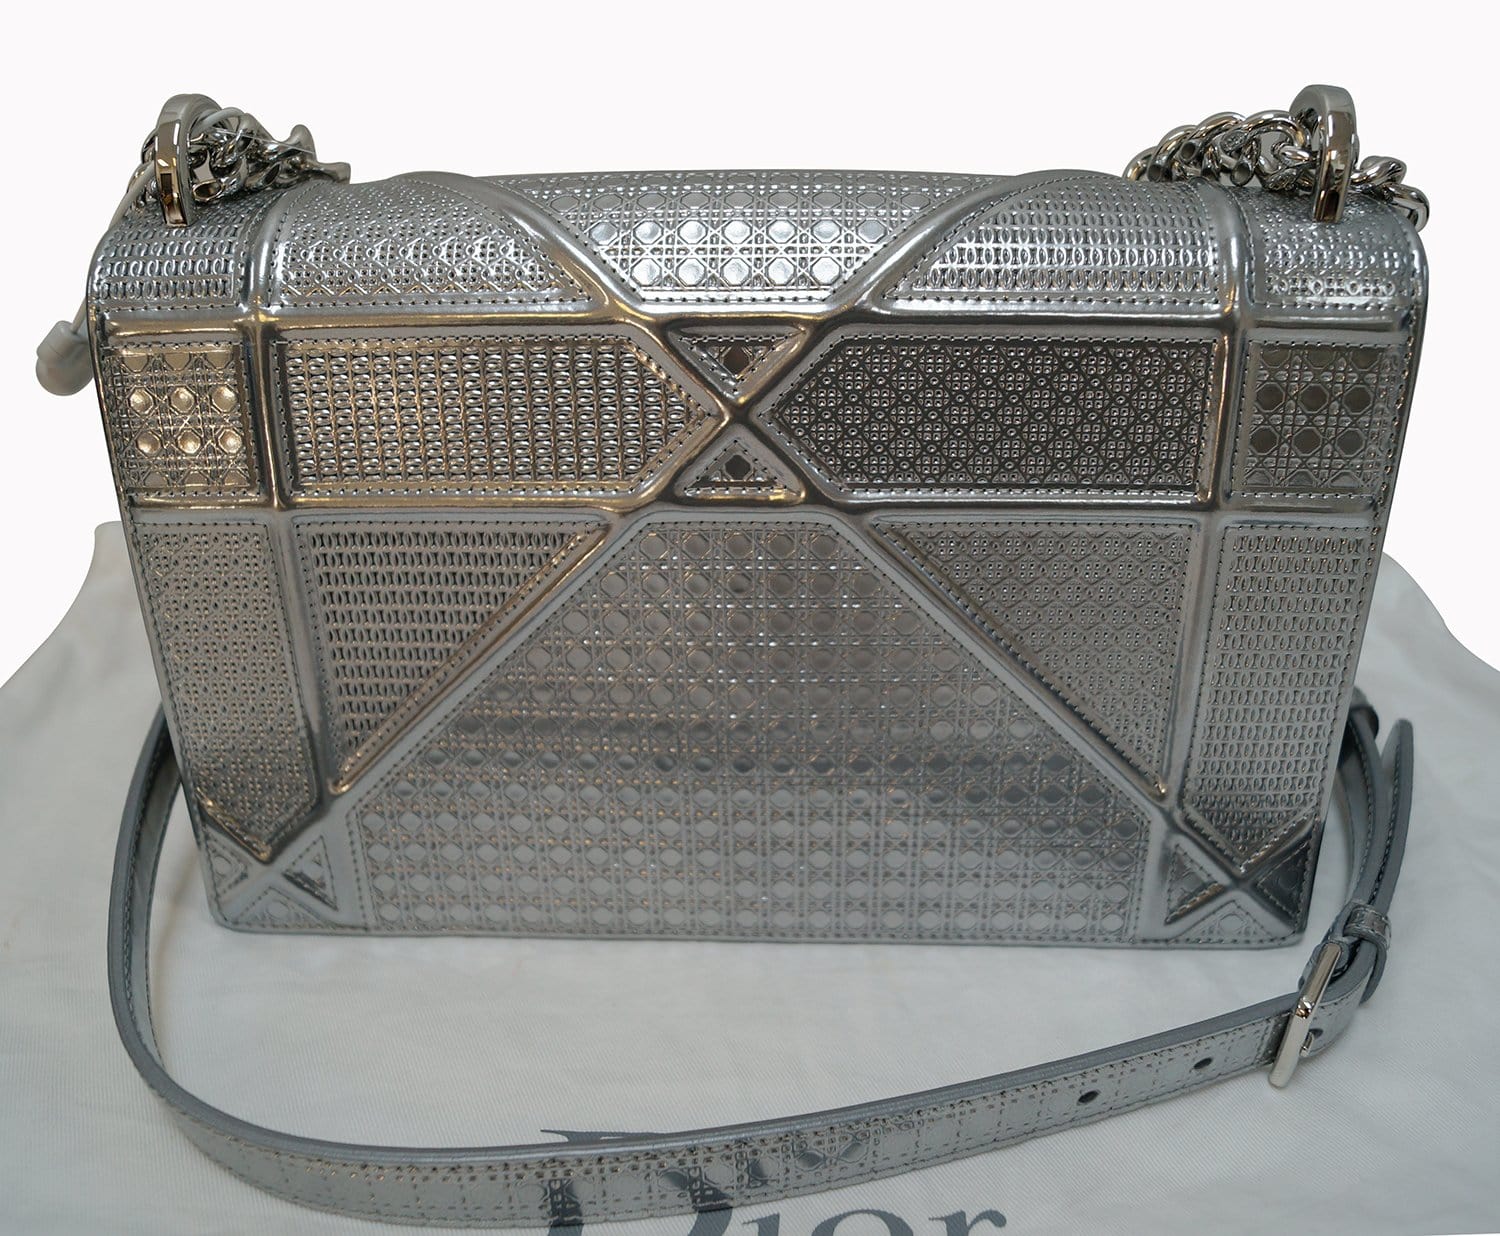 Diorama Small Perforated Flap Bags